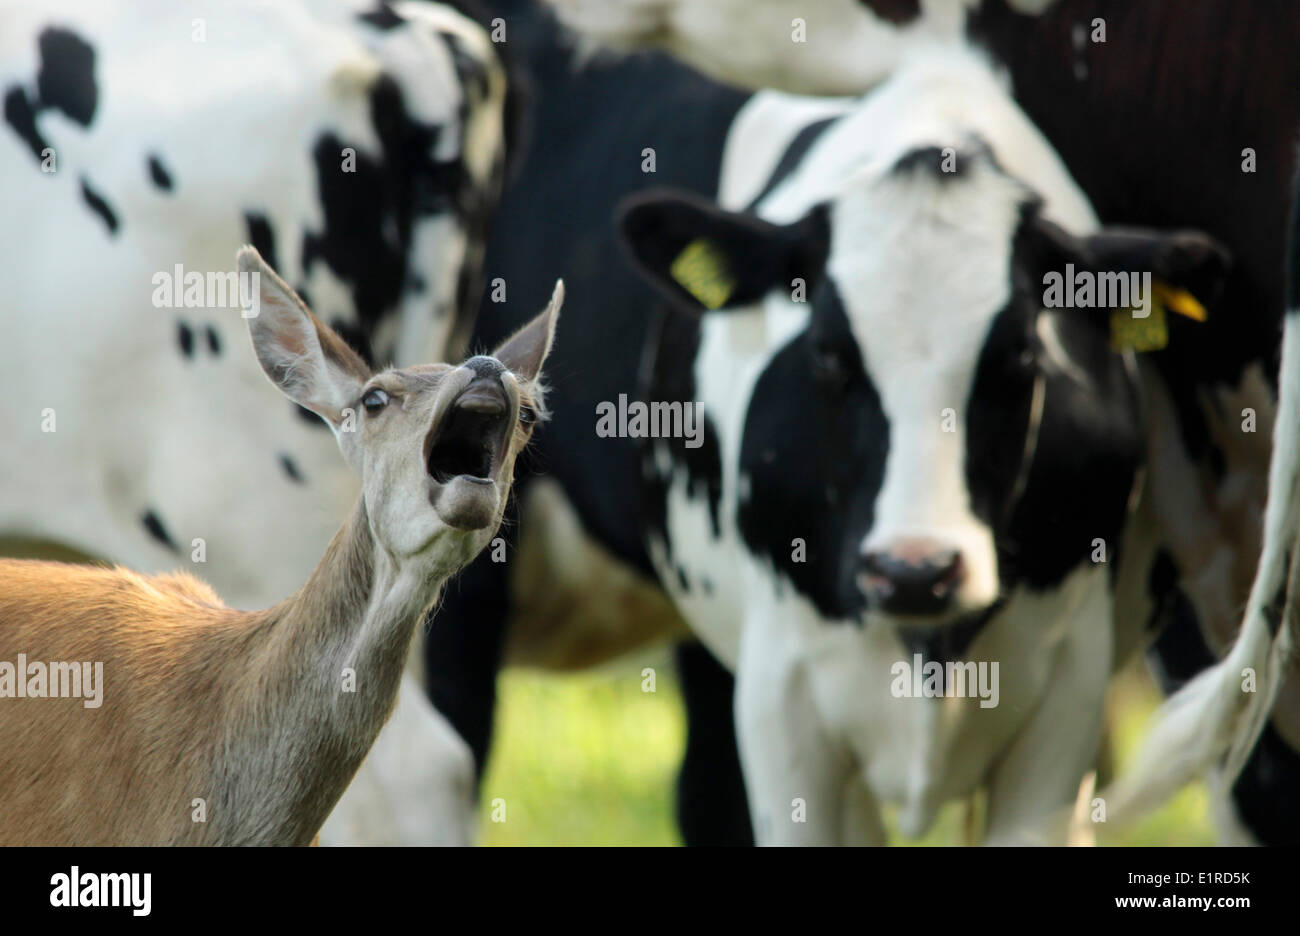 A female red deer, burls like a cow. She lives with these cows after being rejected by her own herd. Stock Photo